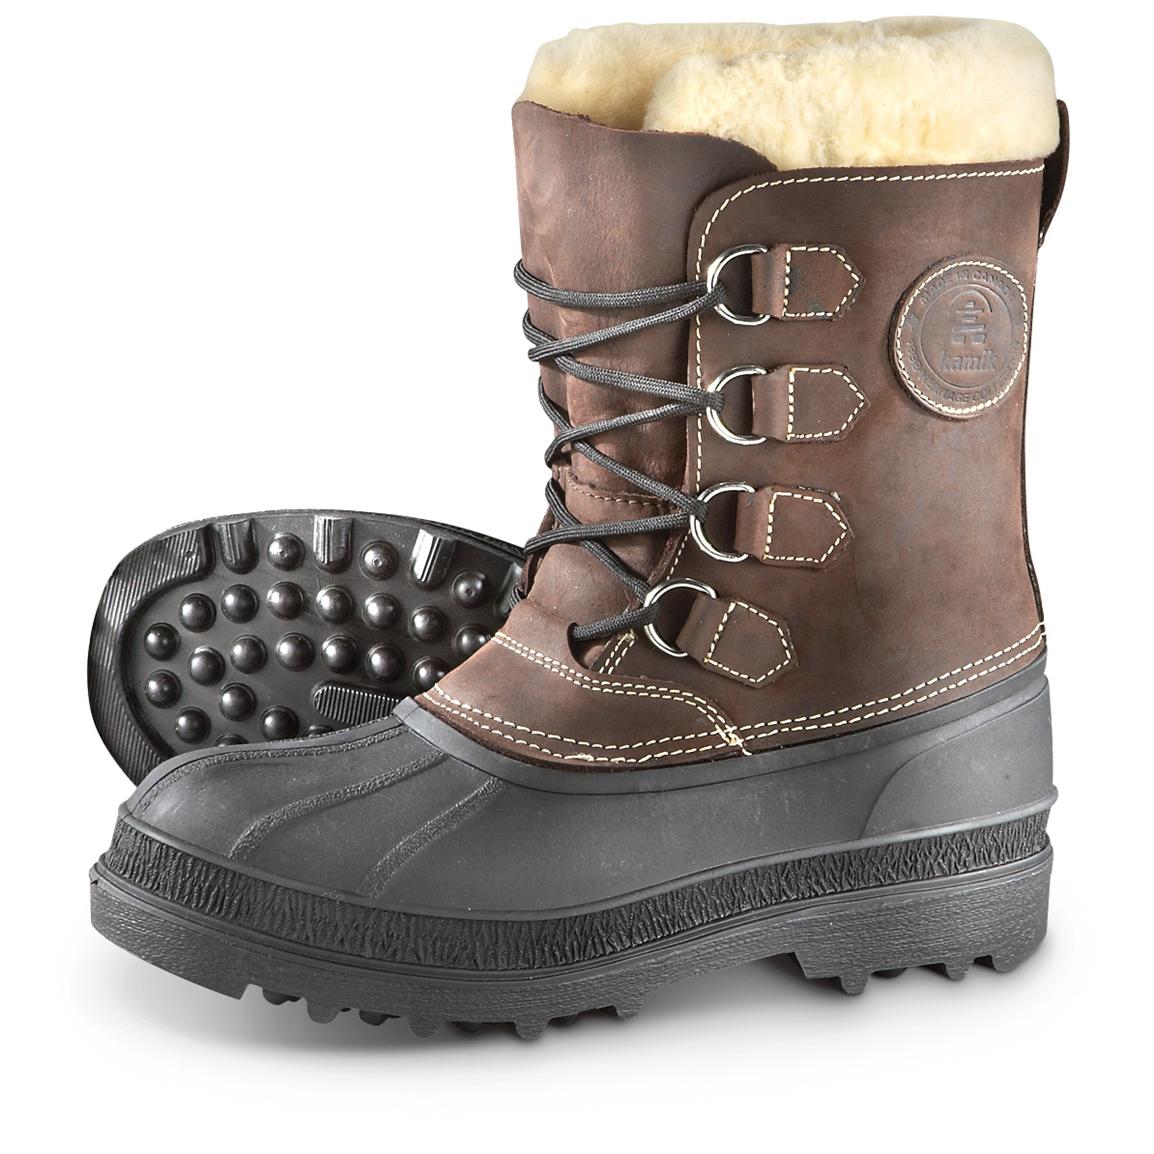 Mens Kamik® Pearson Shearling Boots Gaucho 579885 Winter And Snow Boots At Sportsmans Guide